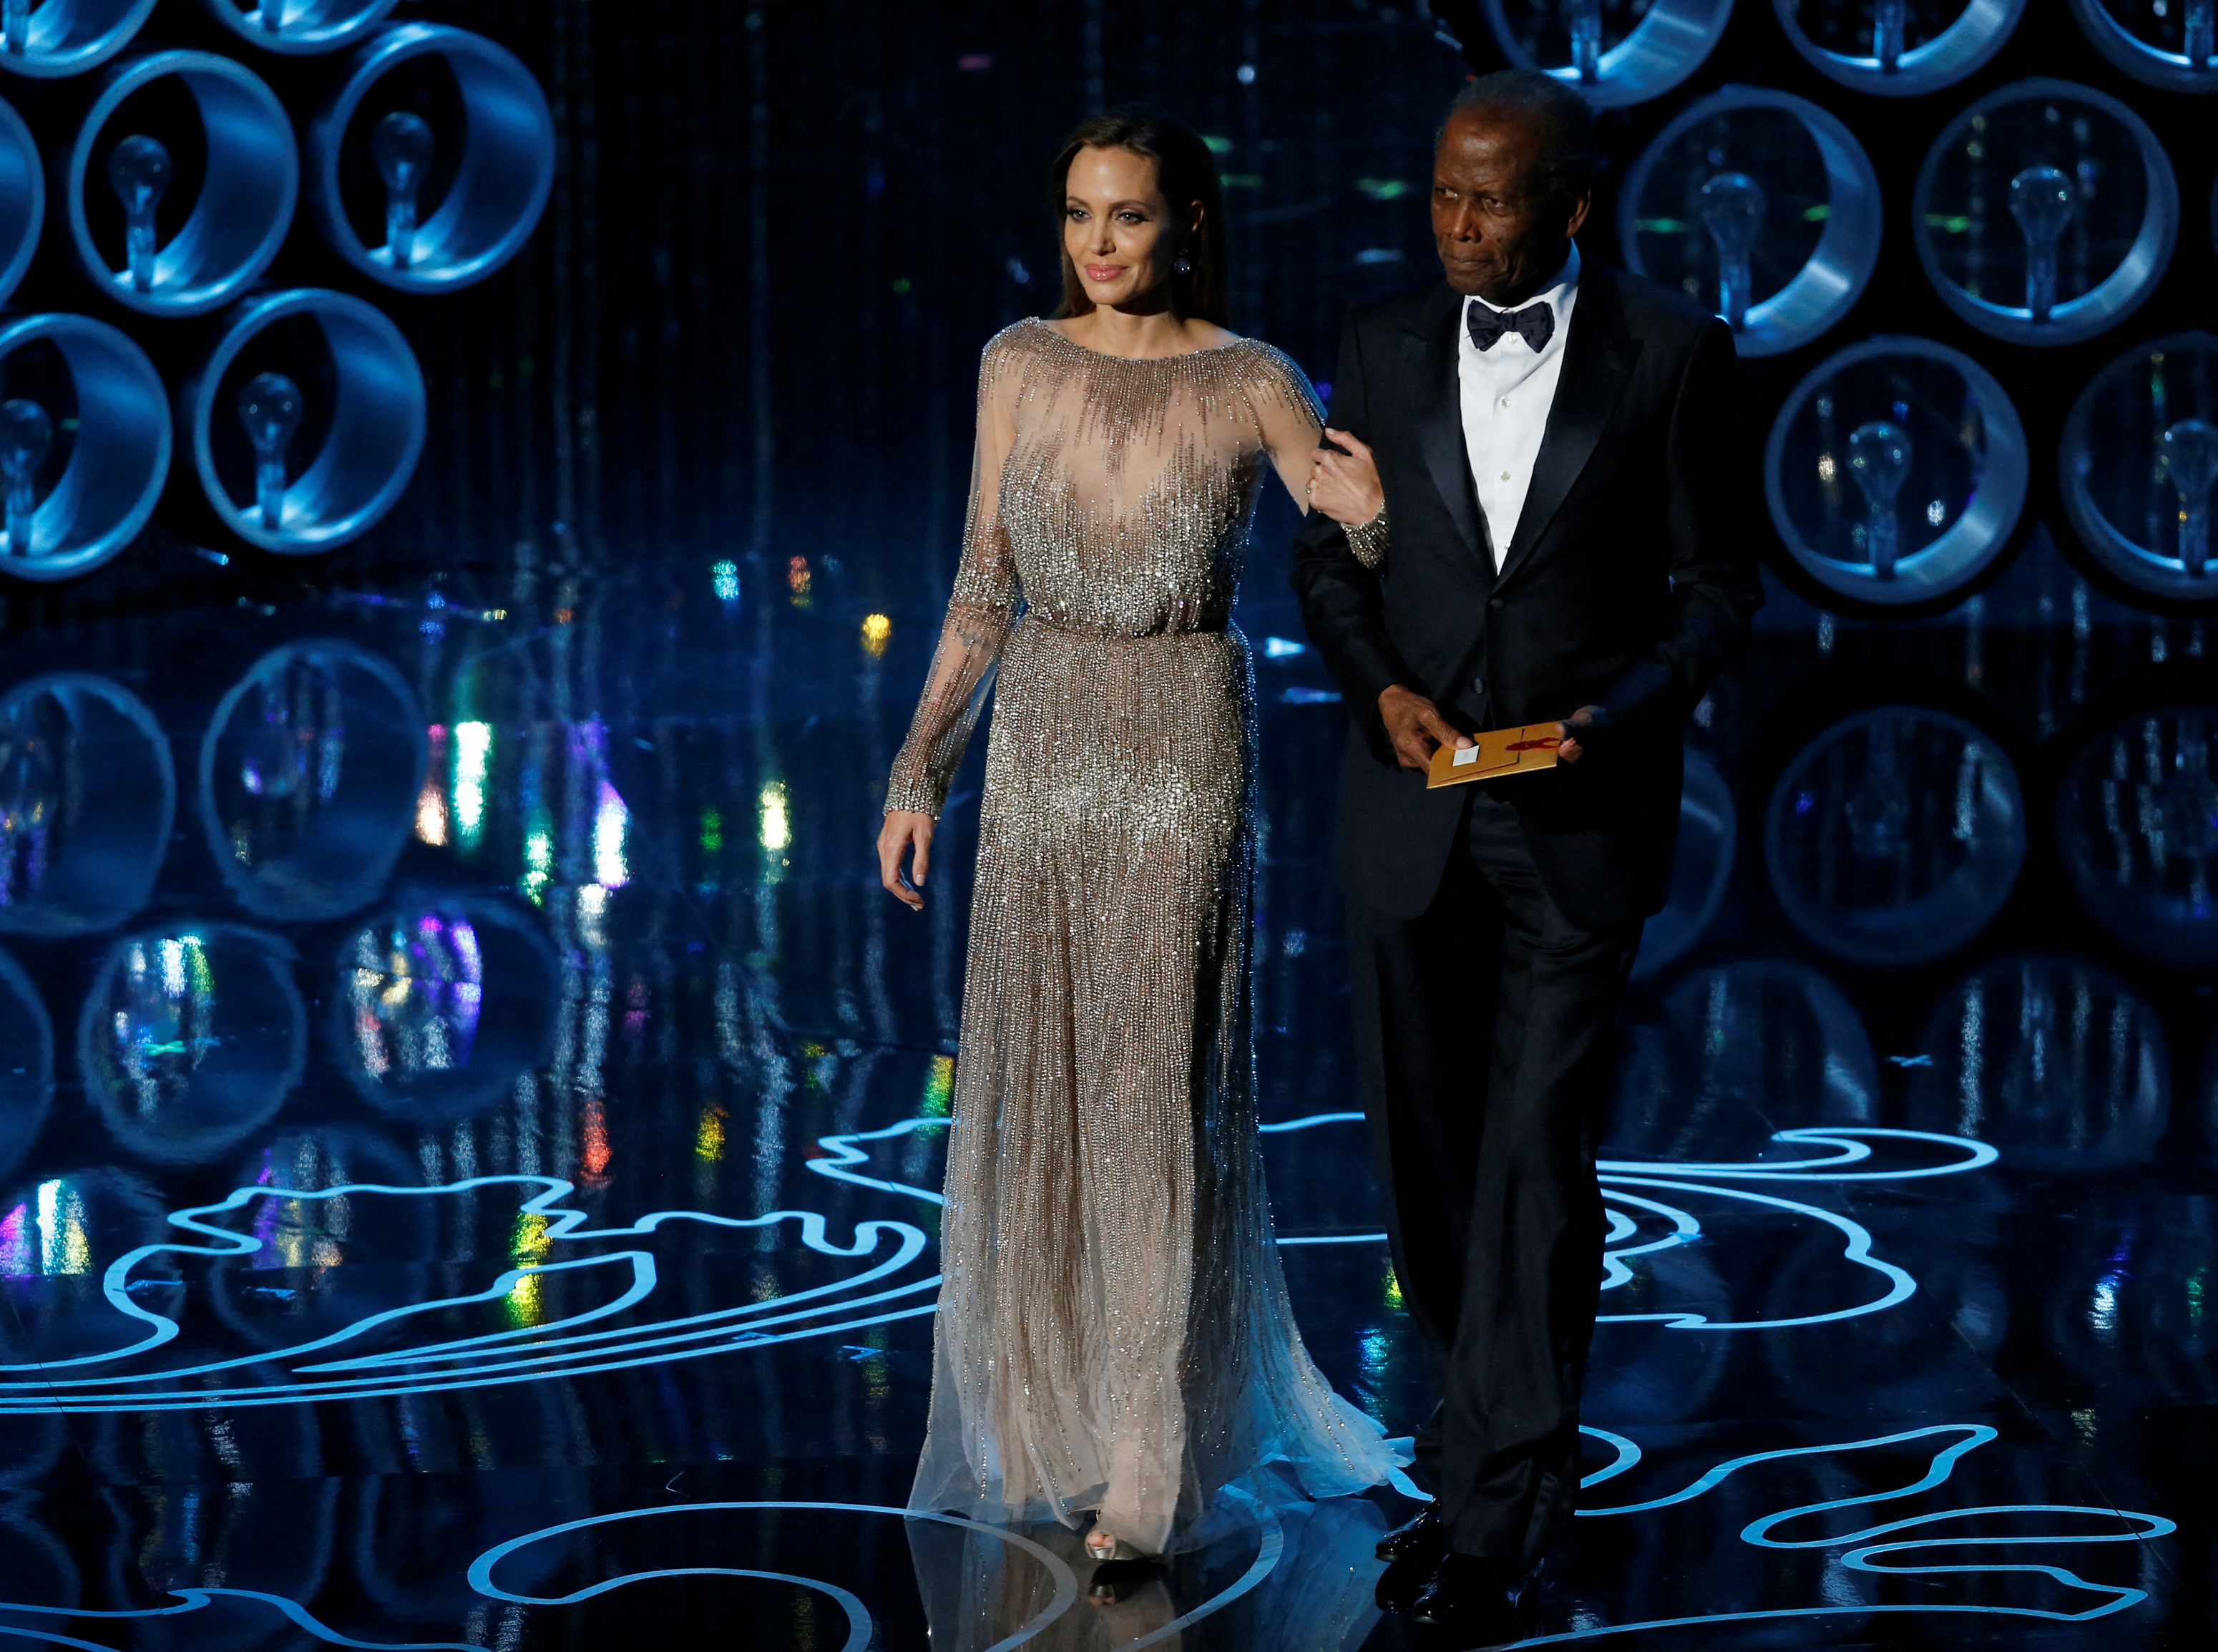 Actors Angelina Jolie and Sidney Poitier take the stage to present the Oscar for achievement in directing at the 86th Academy Awards in Hollywood, California March 2, 2014. REUTERS/Lucy Nicholson